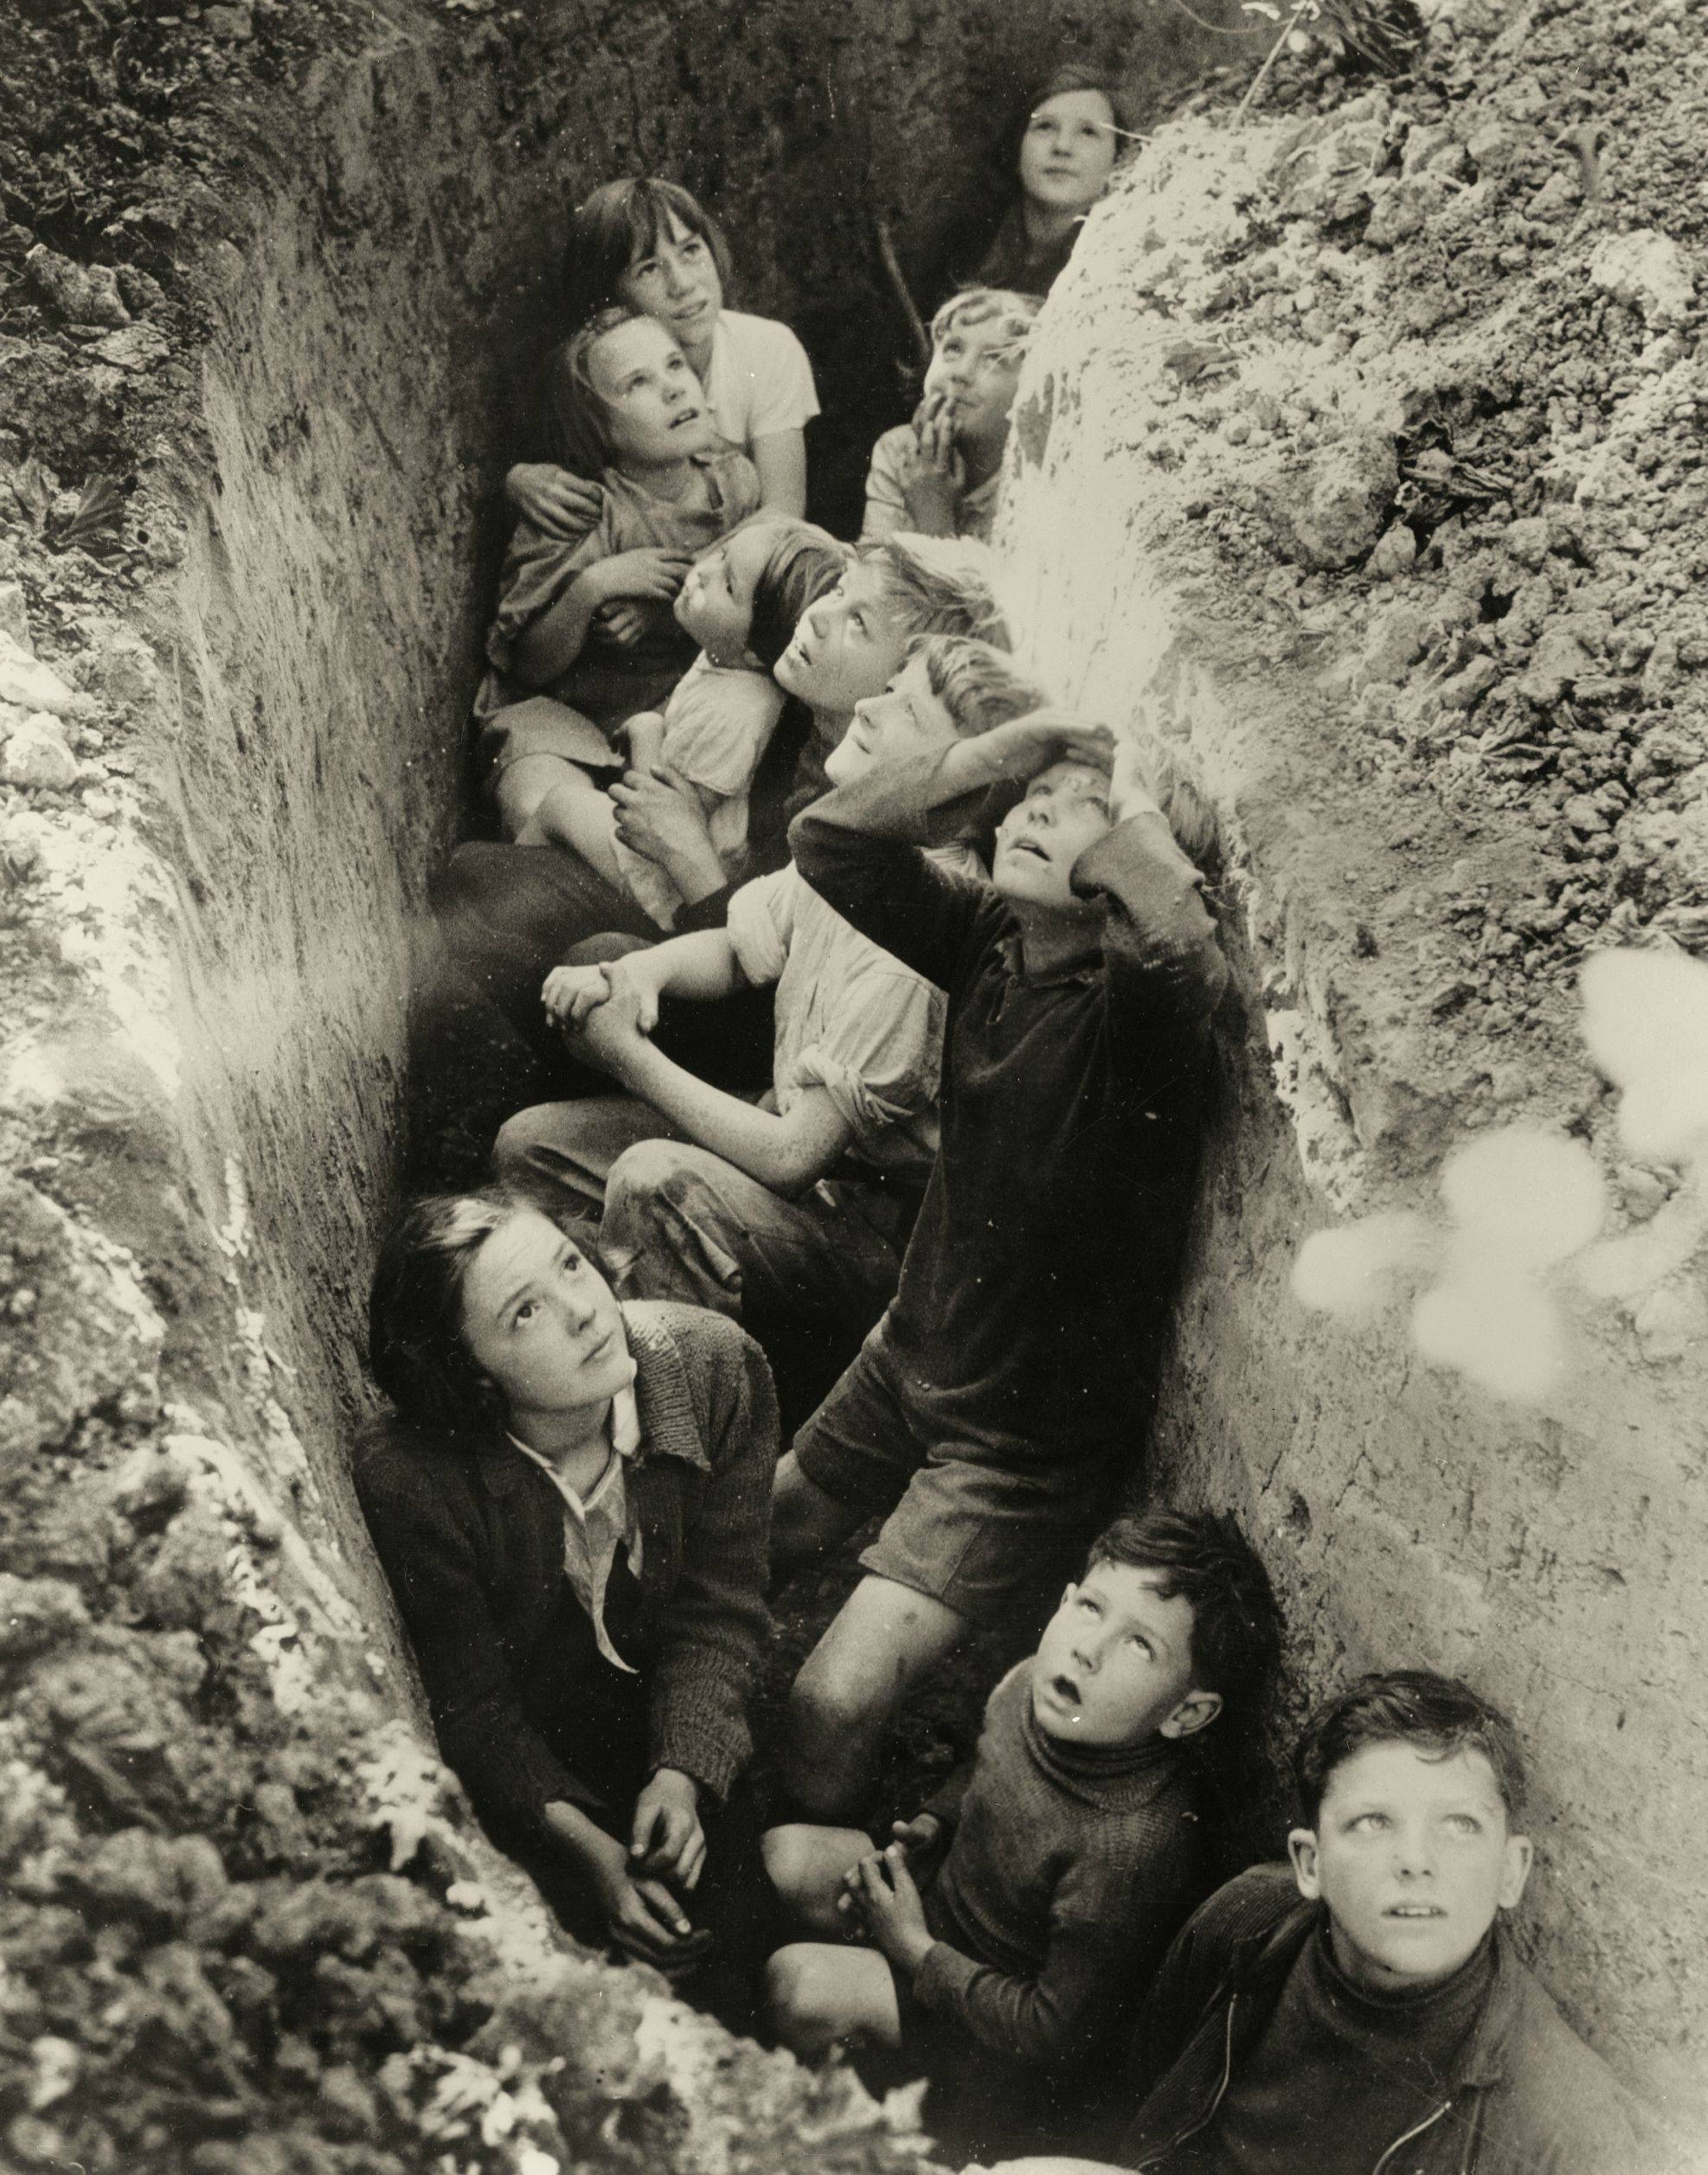 Children take cover in a makeshift bomb shelter during a German air raid over London, England in 1941. The Blitz as it was known lasted a year, and at times the Germans bombed London almost every day and night for months at a time. Around 43,000 civilians died during the bombings, with another 135,000 wounded.